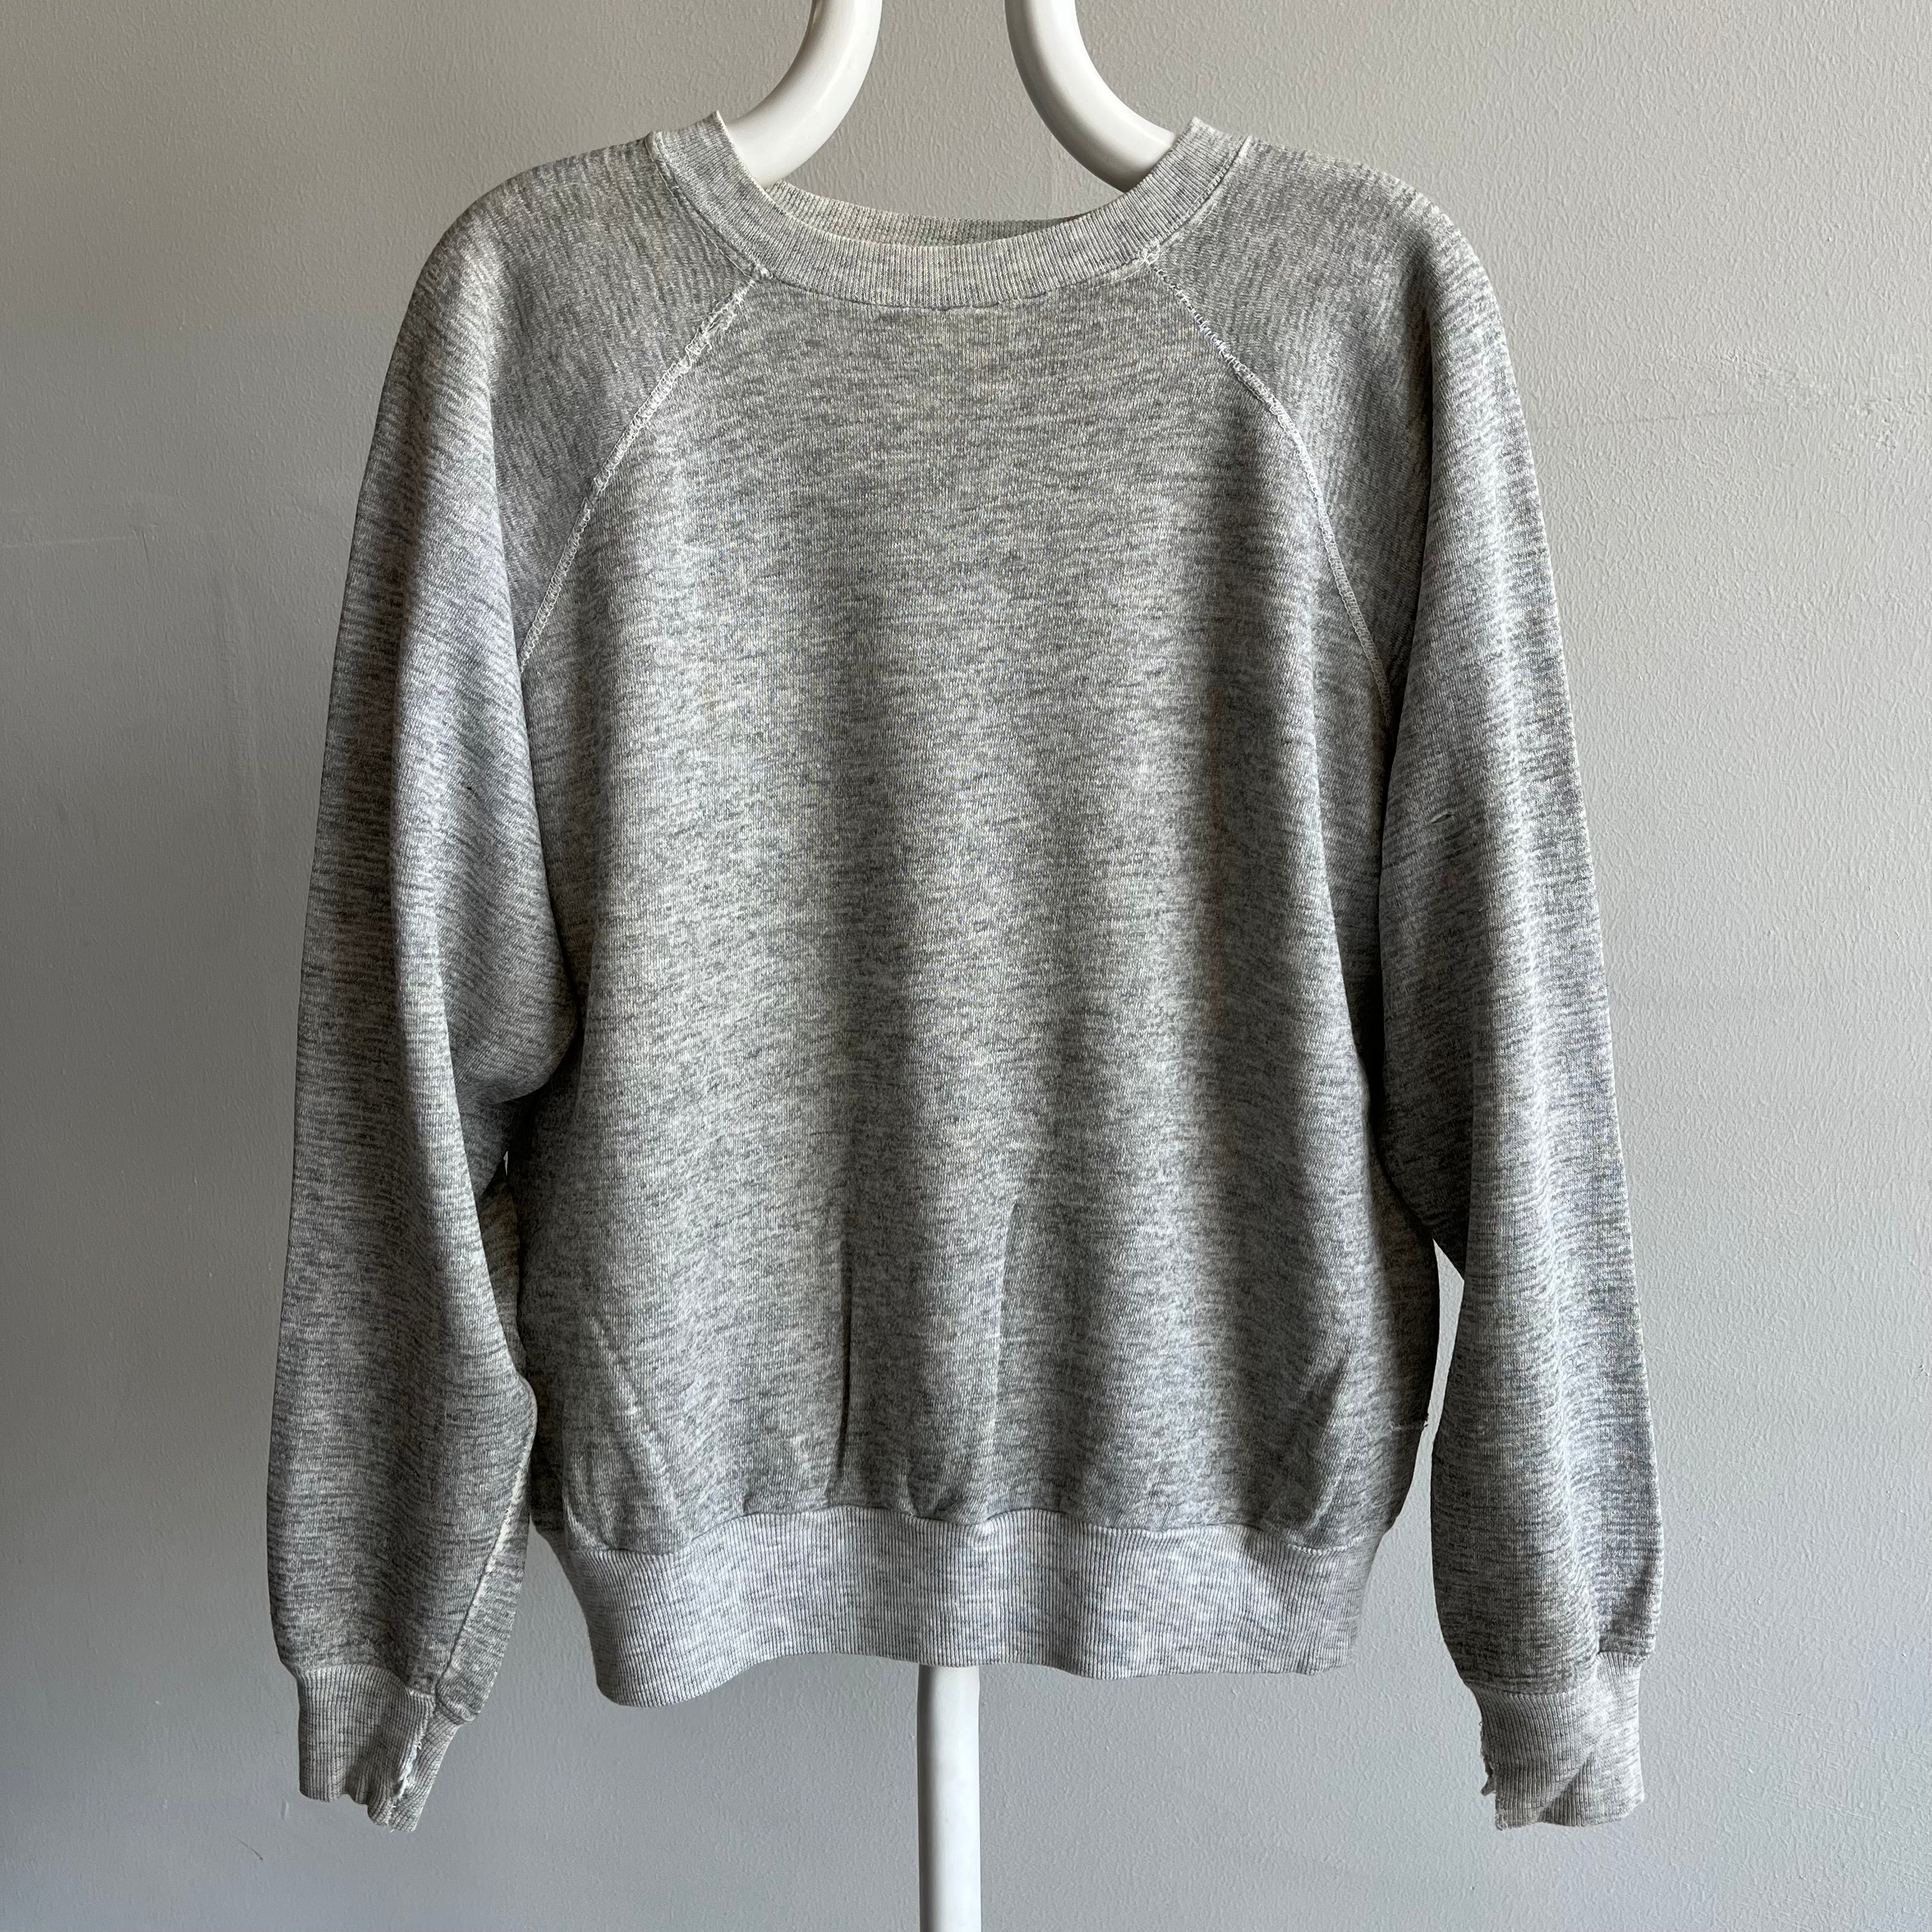 1980s Blank Thinned Out Gray Worn Raglan